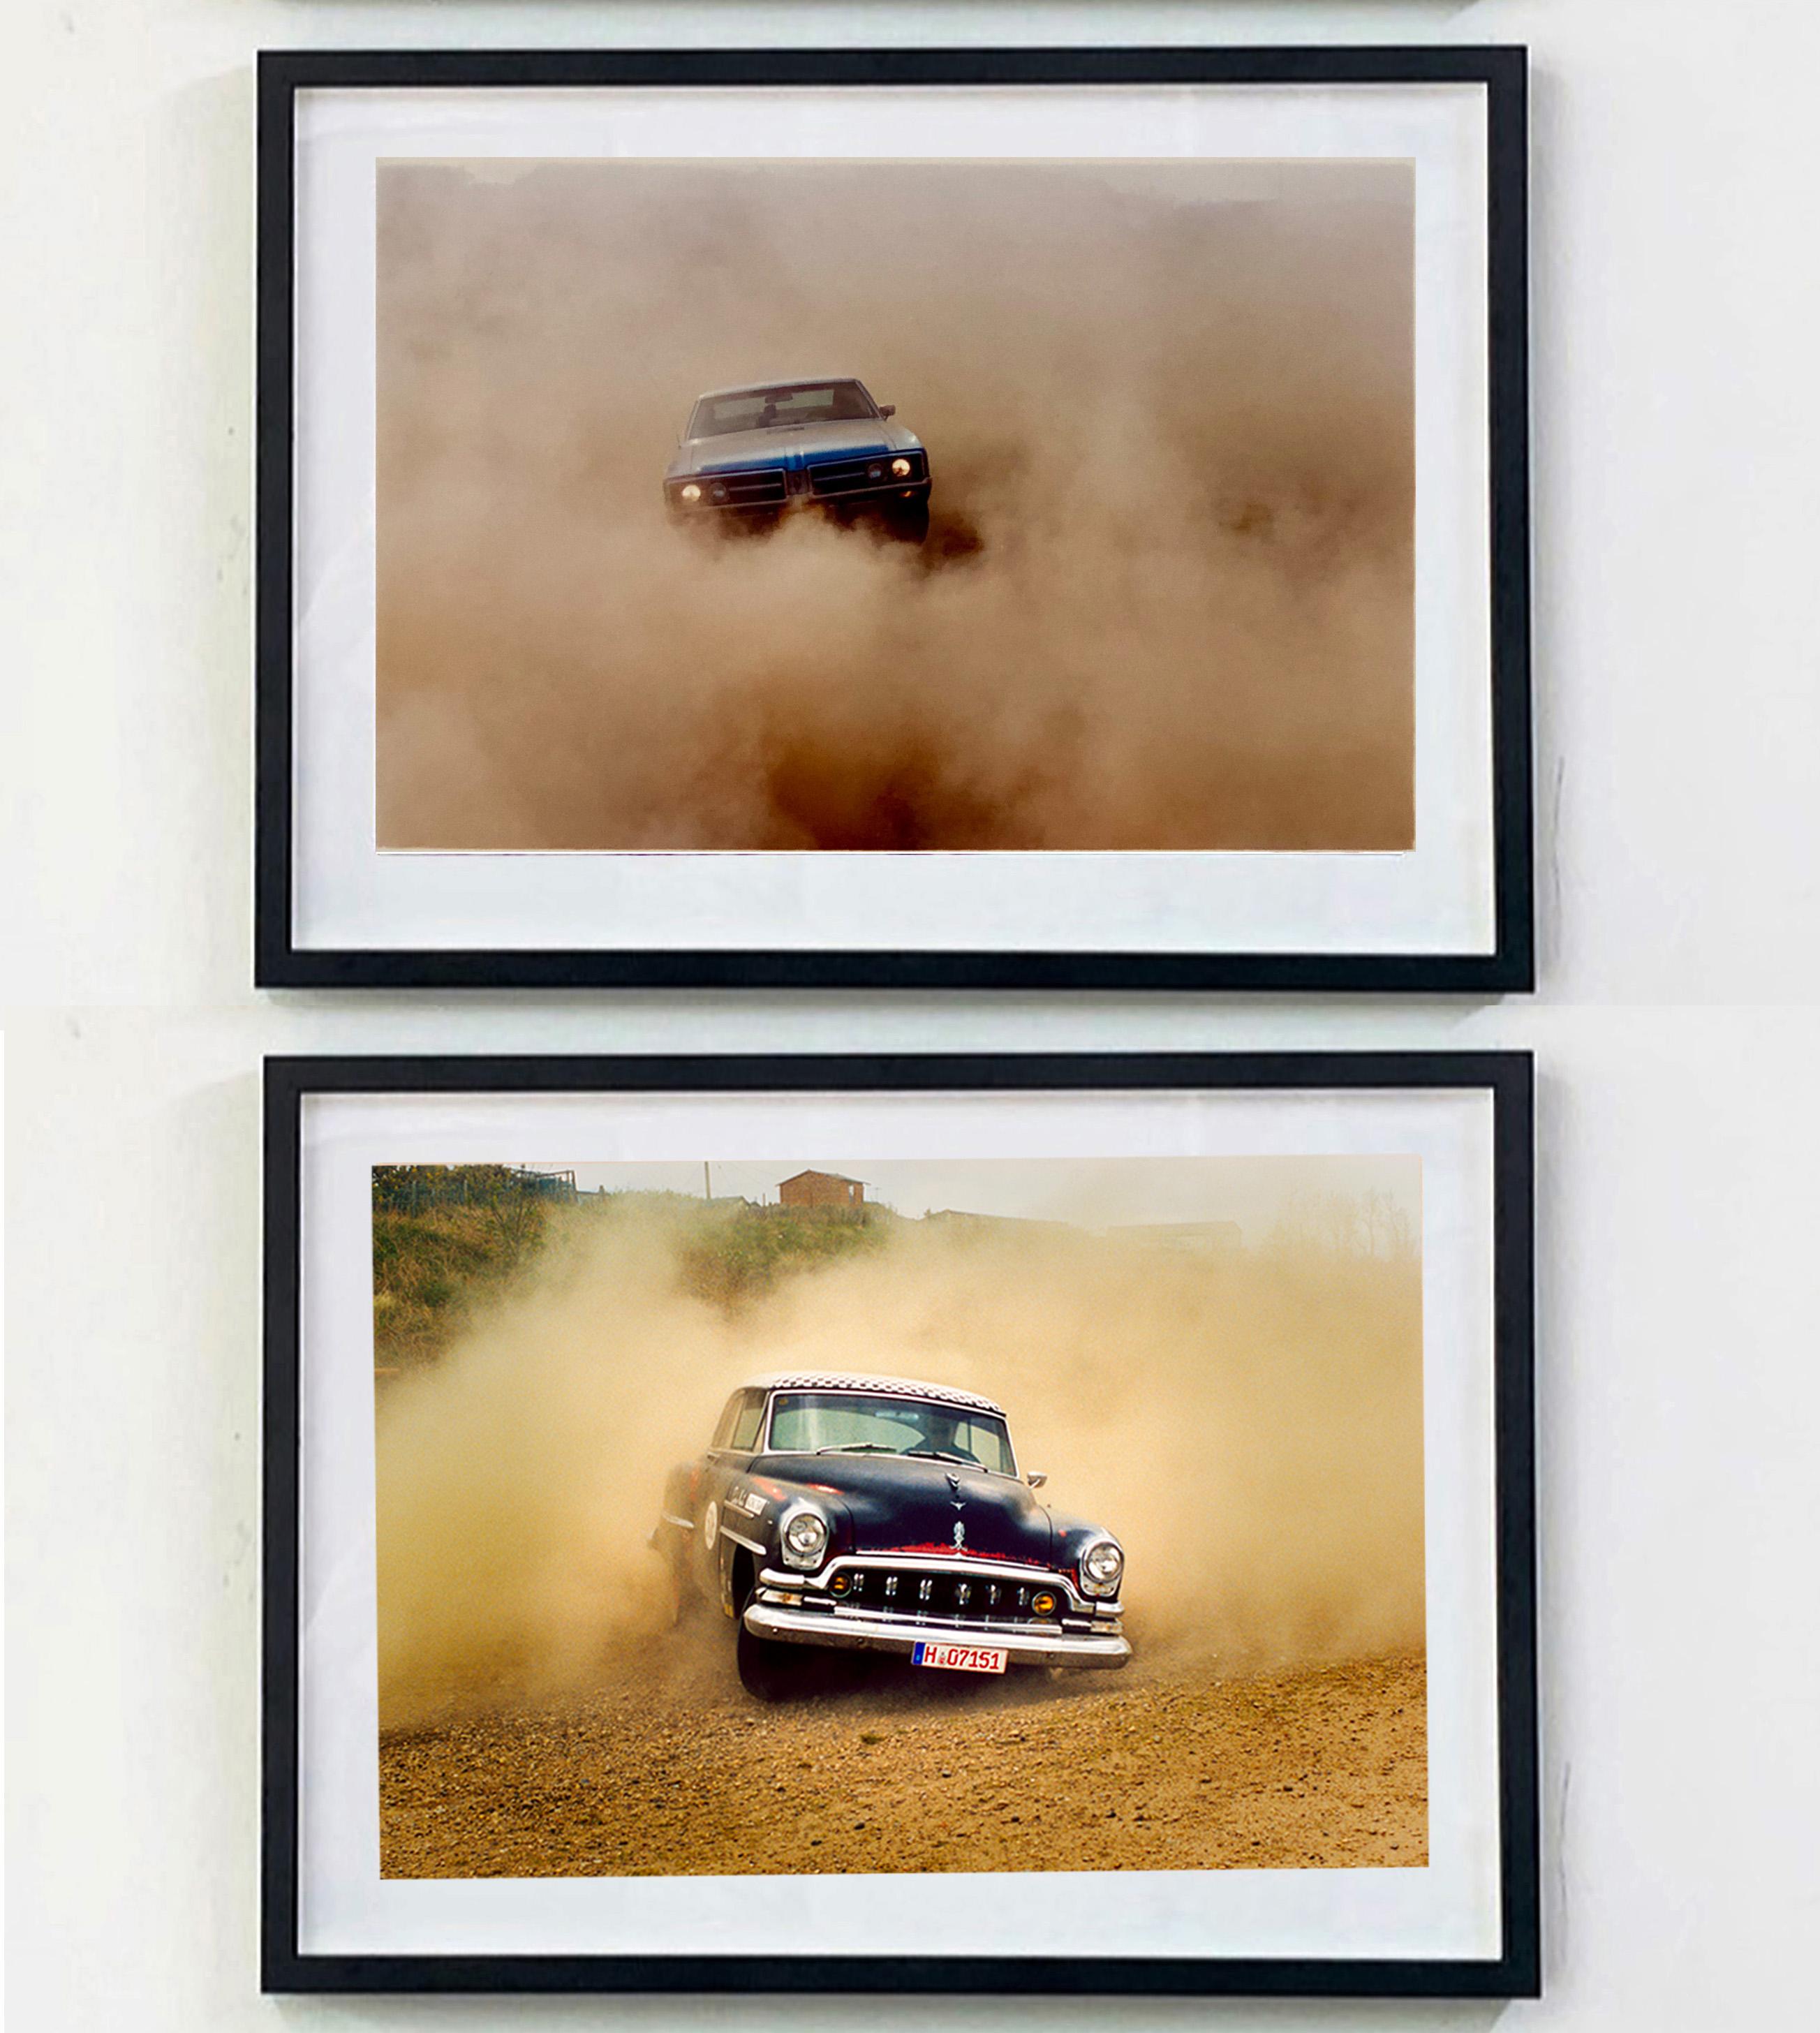 'Donutting' shows a classic American car donut driving on a Norfolk beach in the East of England. This photograph was captured at Hemsby Rock and Roll weekend, and is part of Richard Heeps' Man's Ruin' series.

This artwork is a limited edition